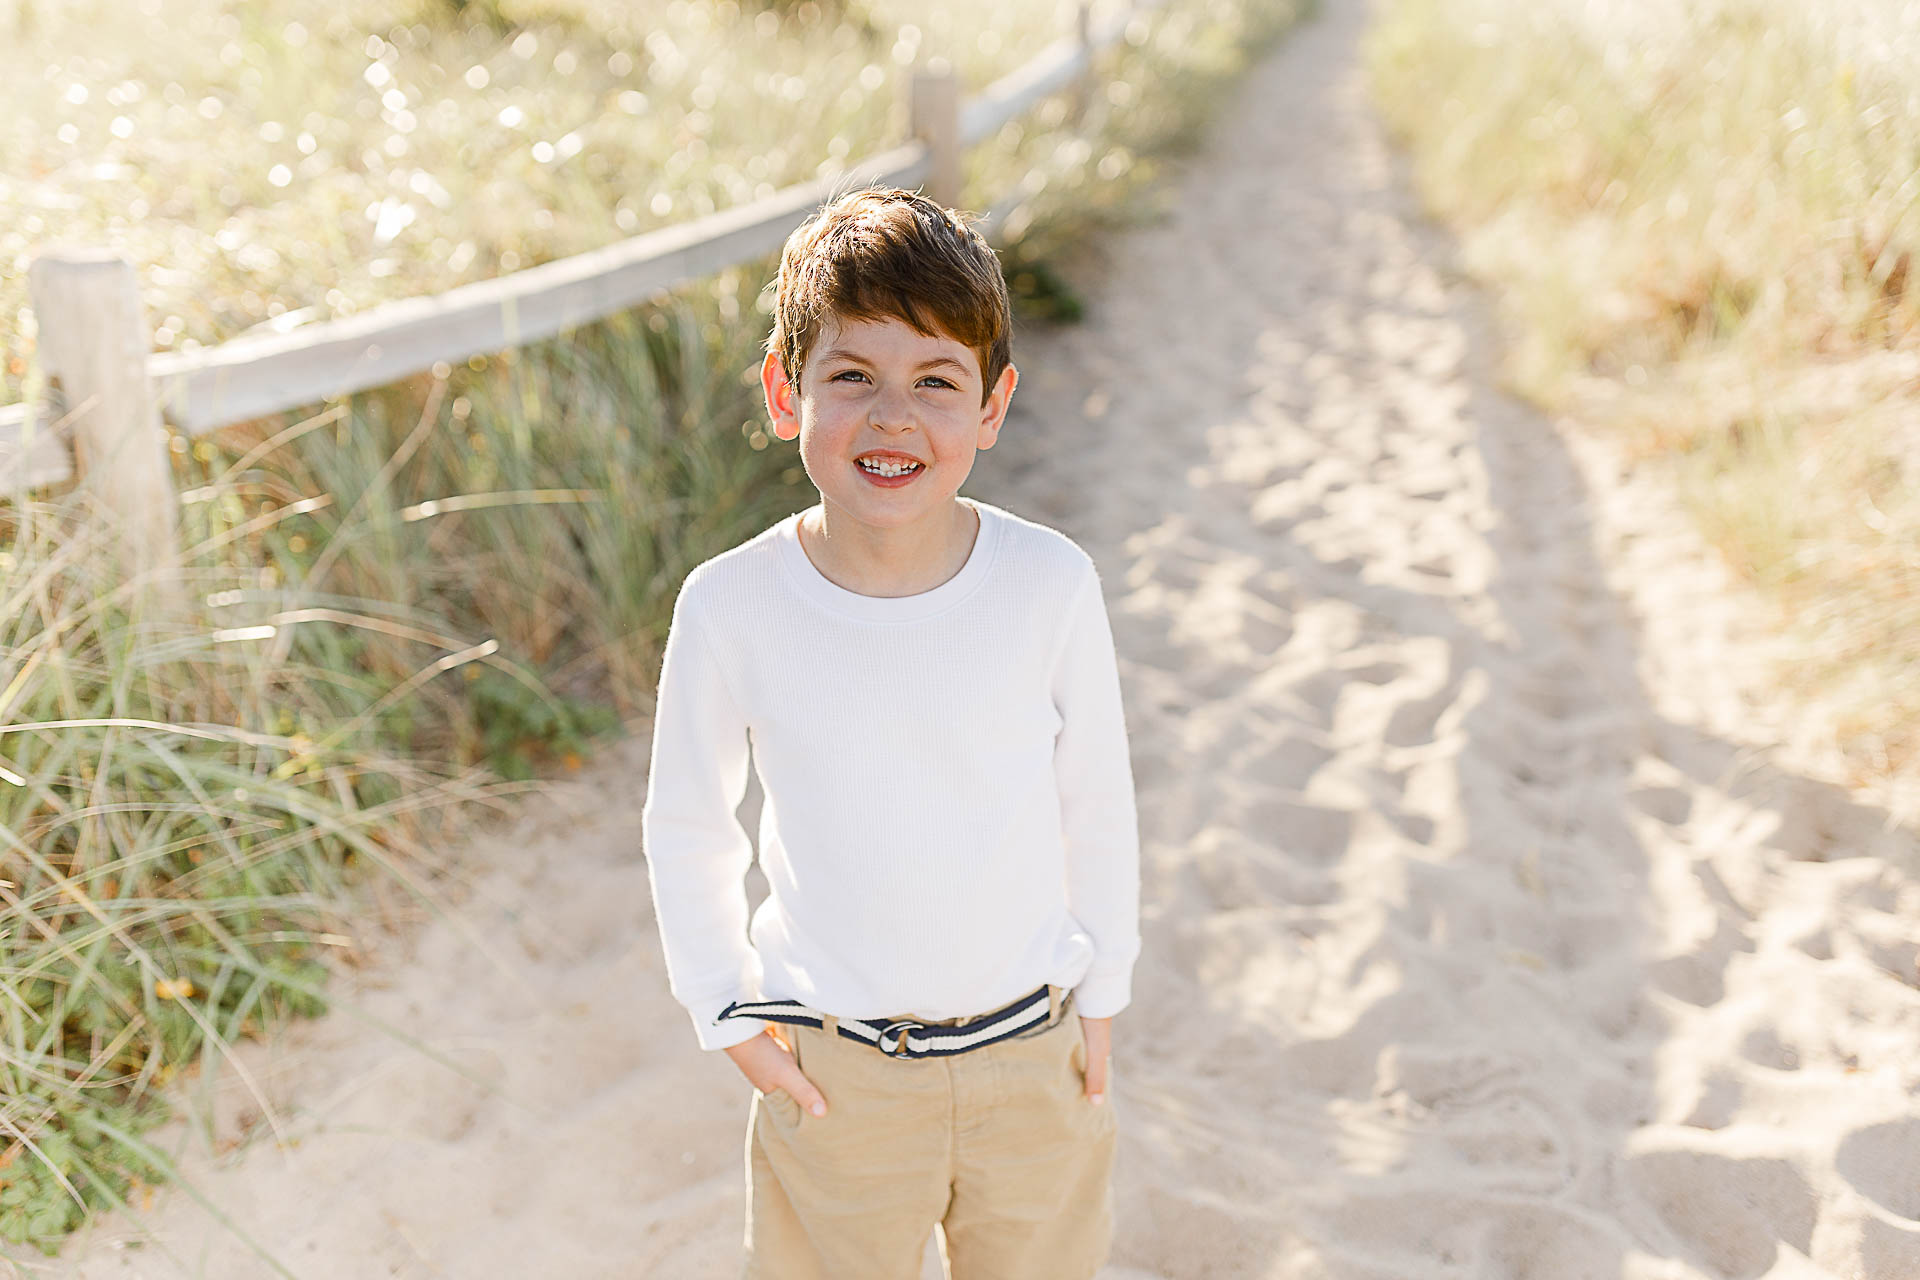 Watch Hill Family Portraits by Christina Runnals Photography | Boy standing in sand near fence and beach grass